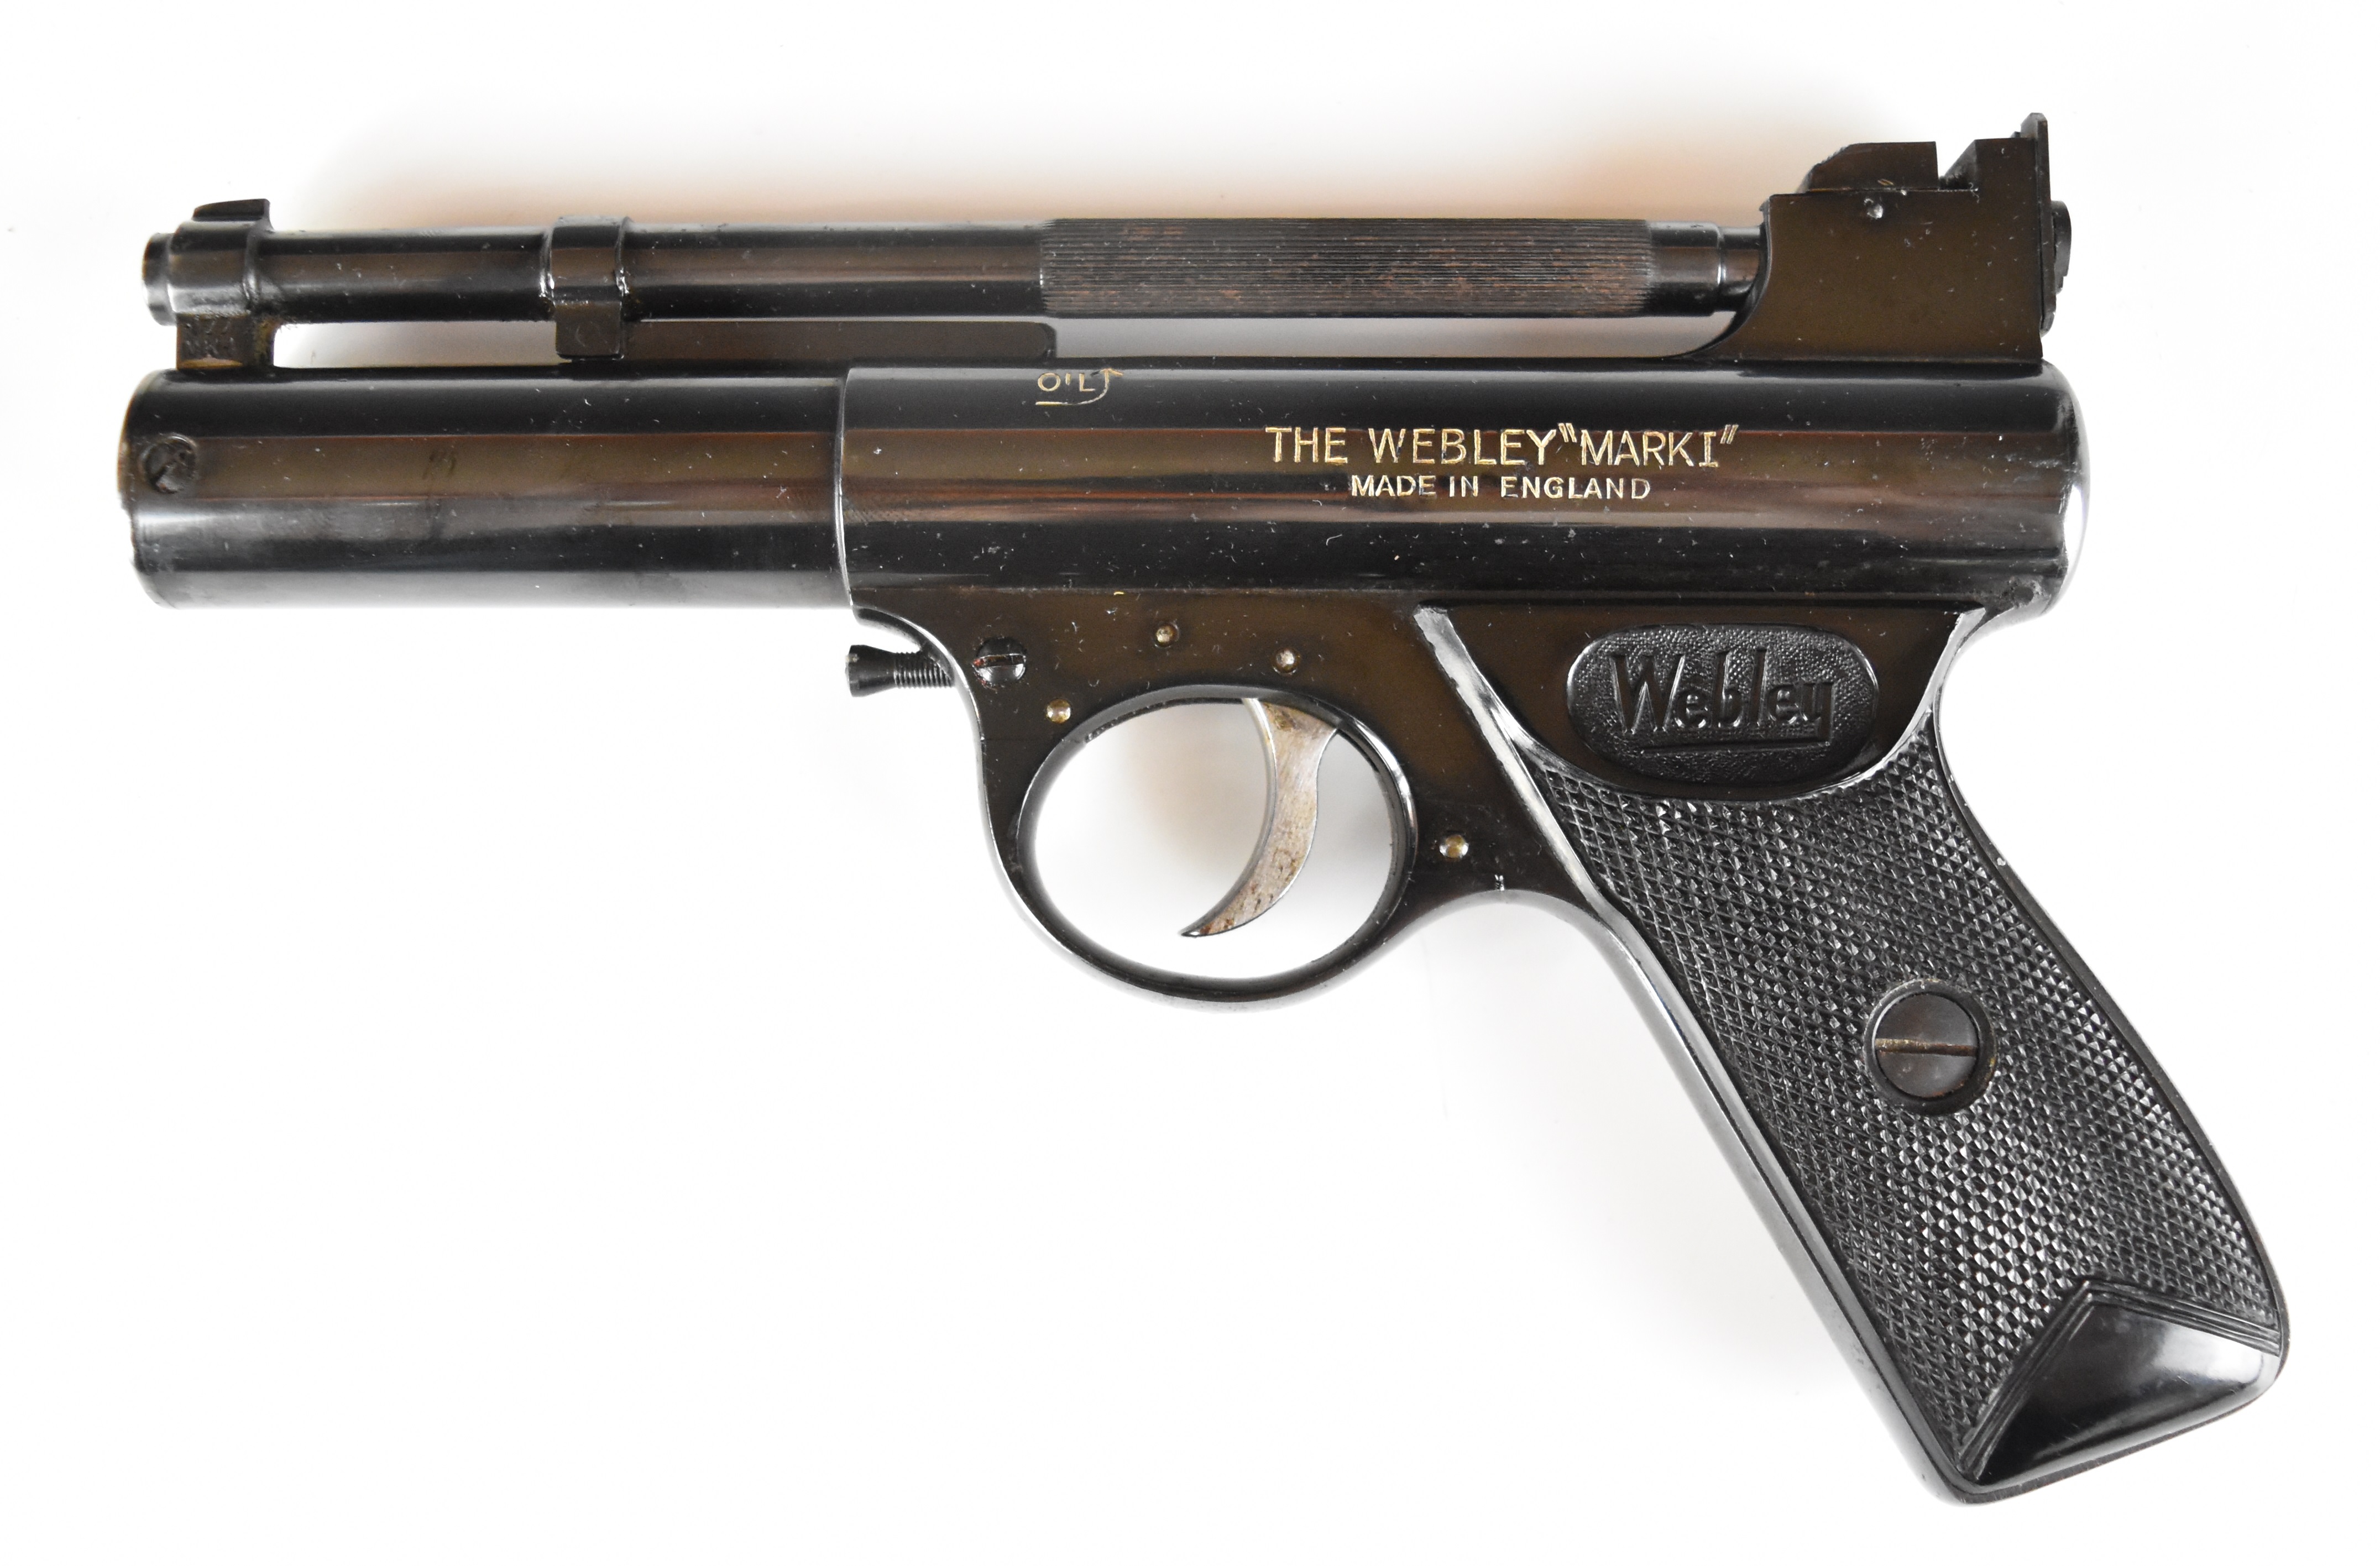 Webley Mark 1 .177 air pistol with named and chequered grips and adjustable sights and trigger, - Image 3 of 15